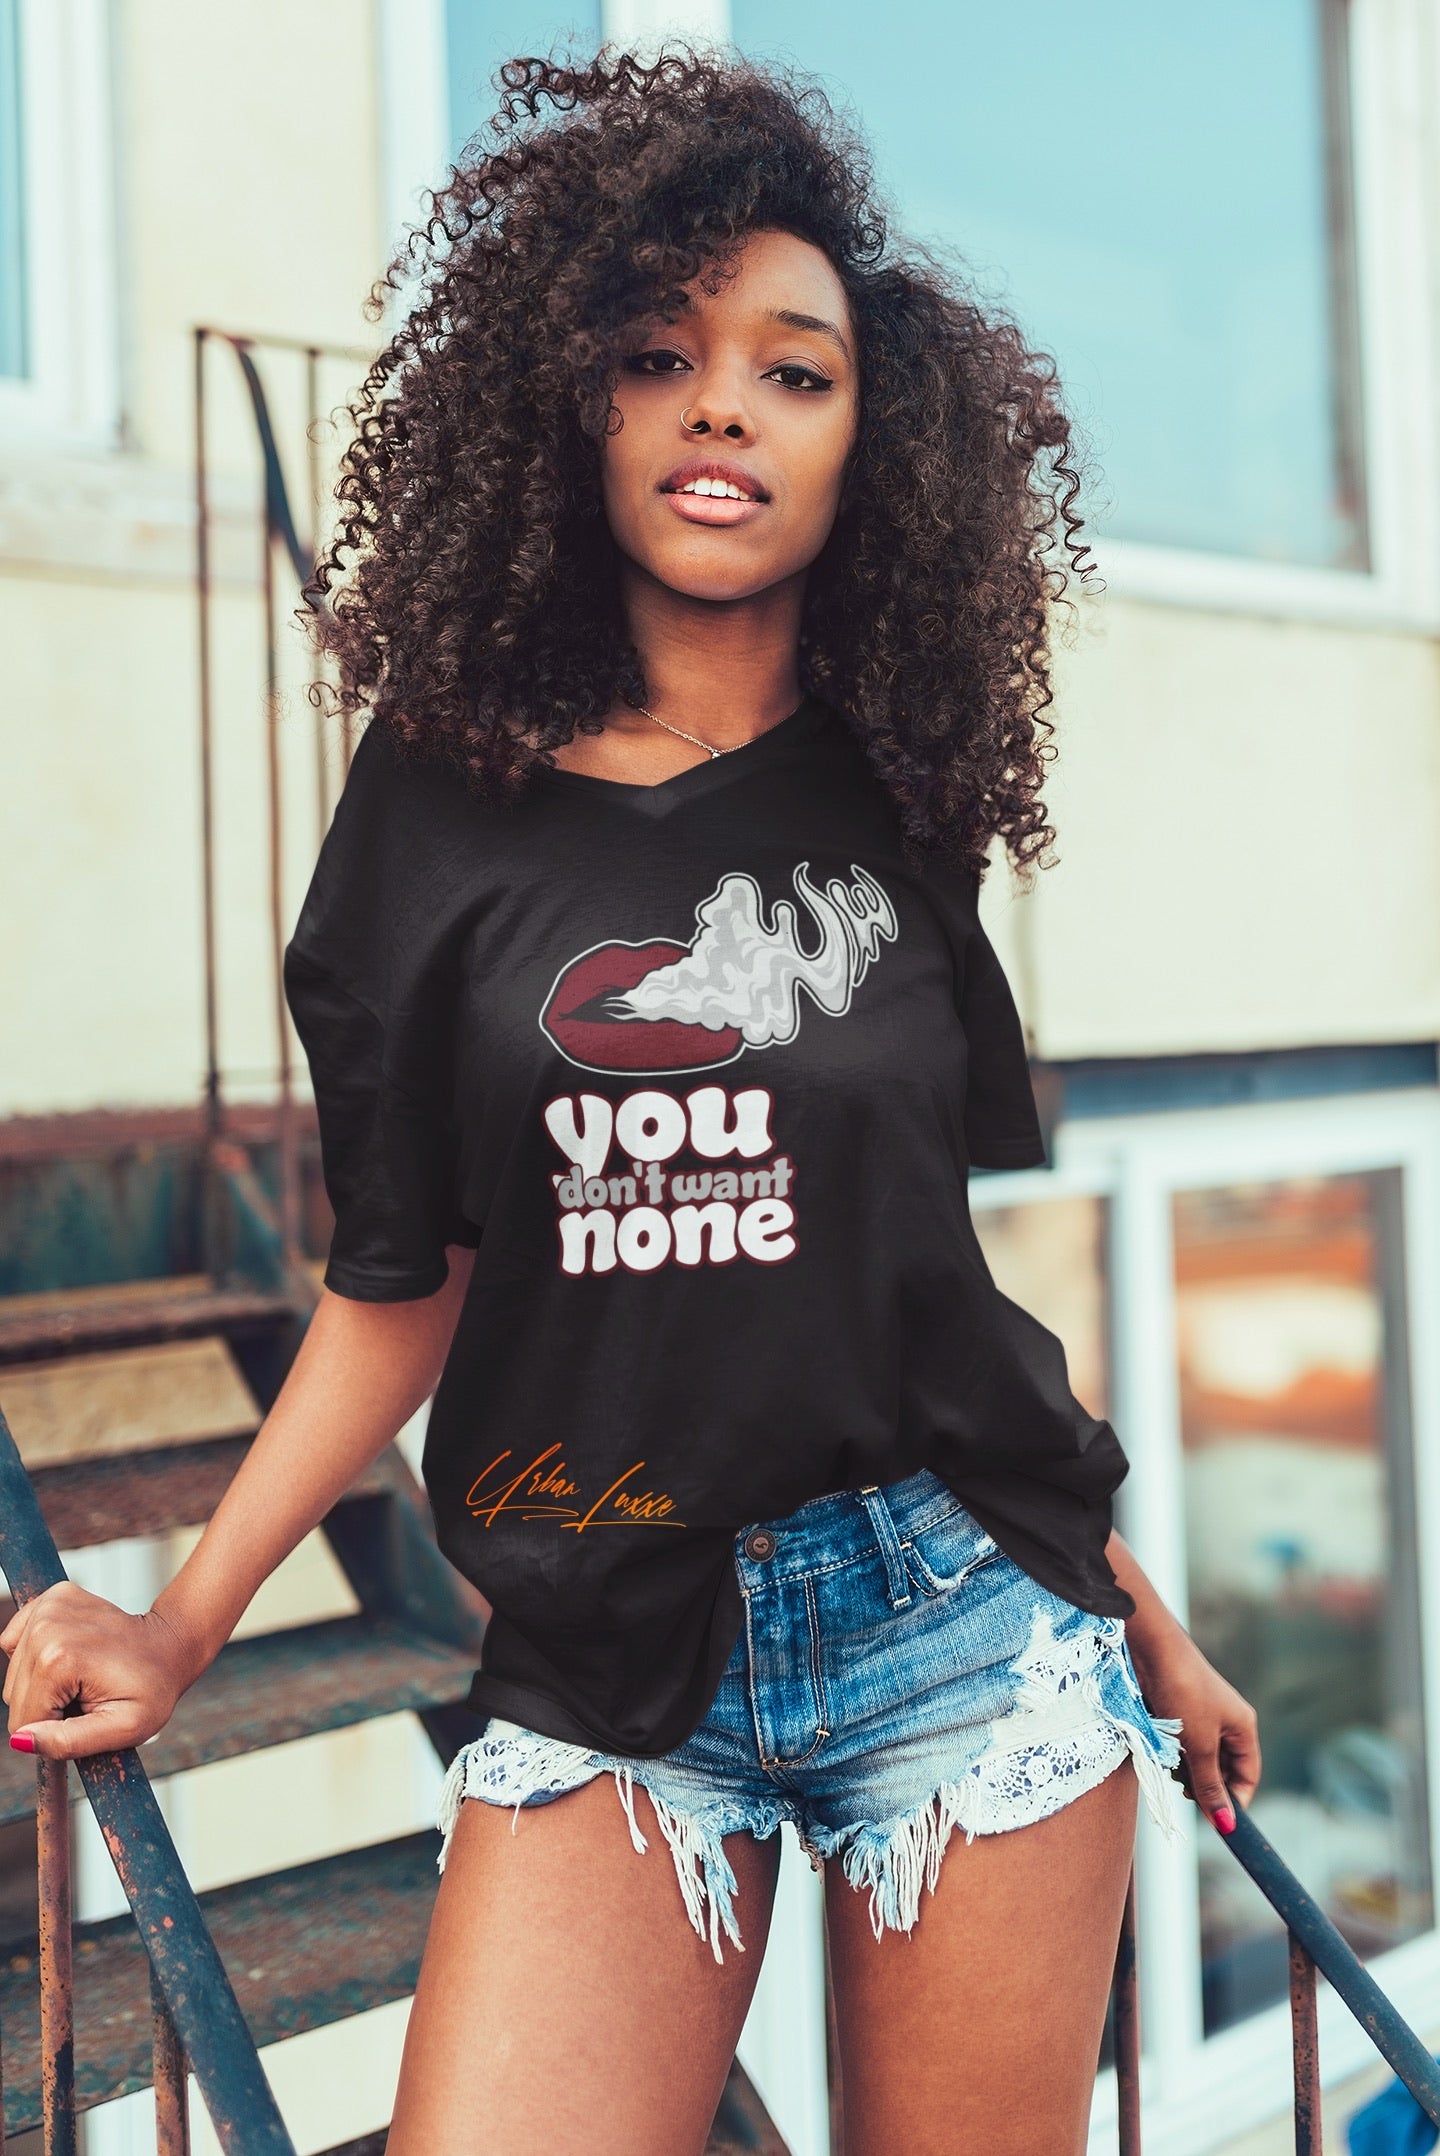 You Don’t Want None T-shirt